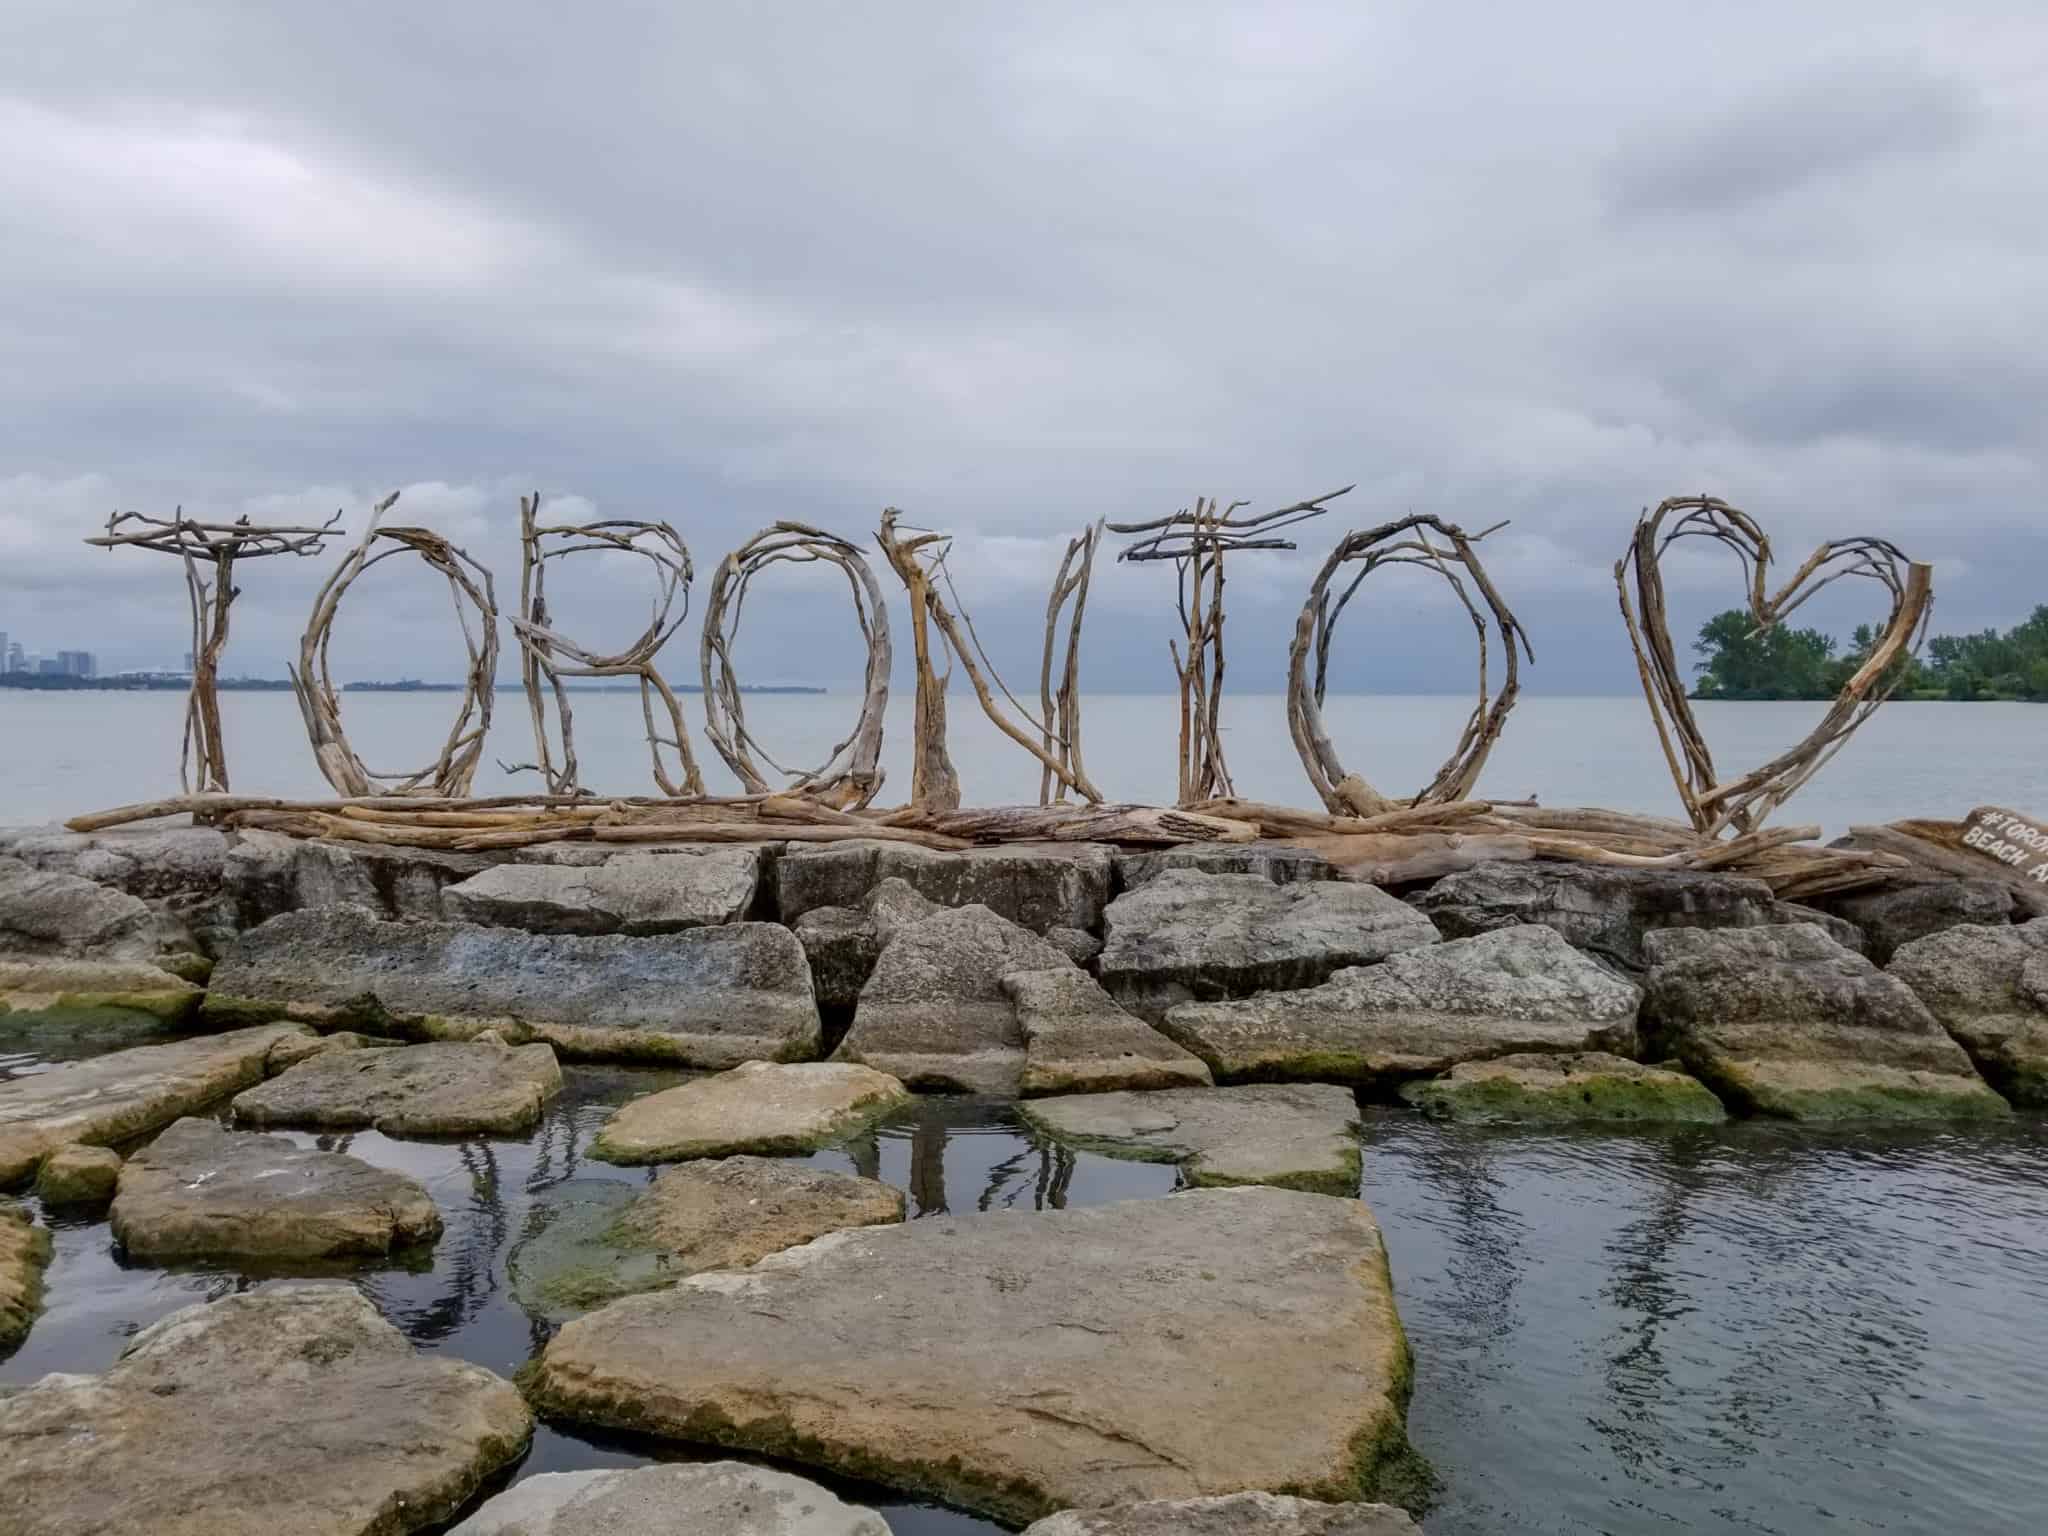 Spending time in the parks is one of the free things to do in Toronto